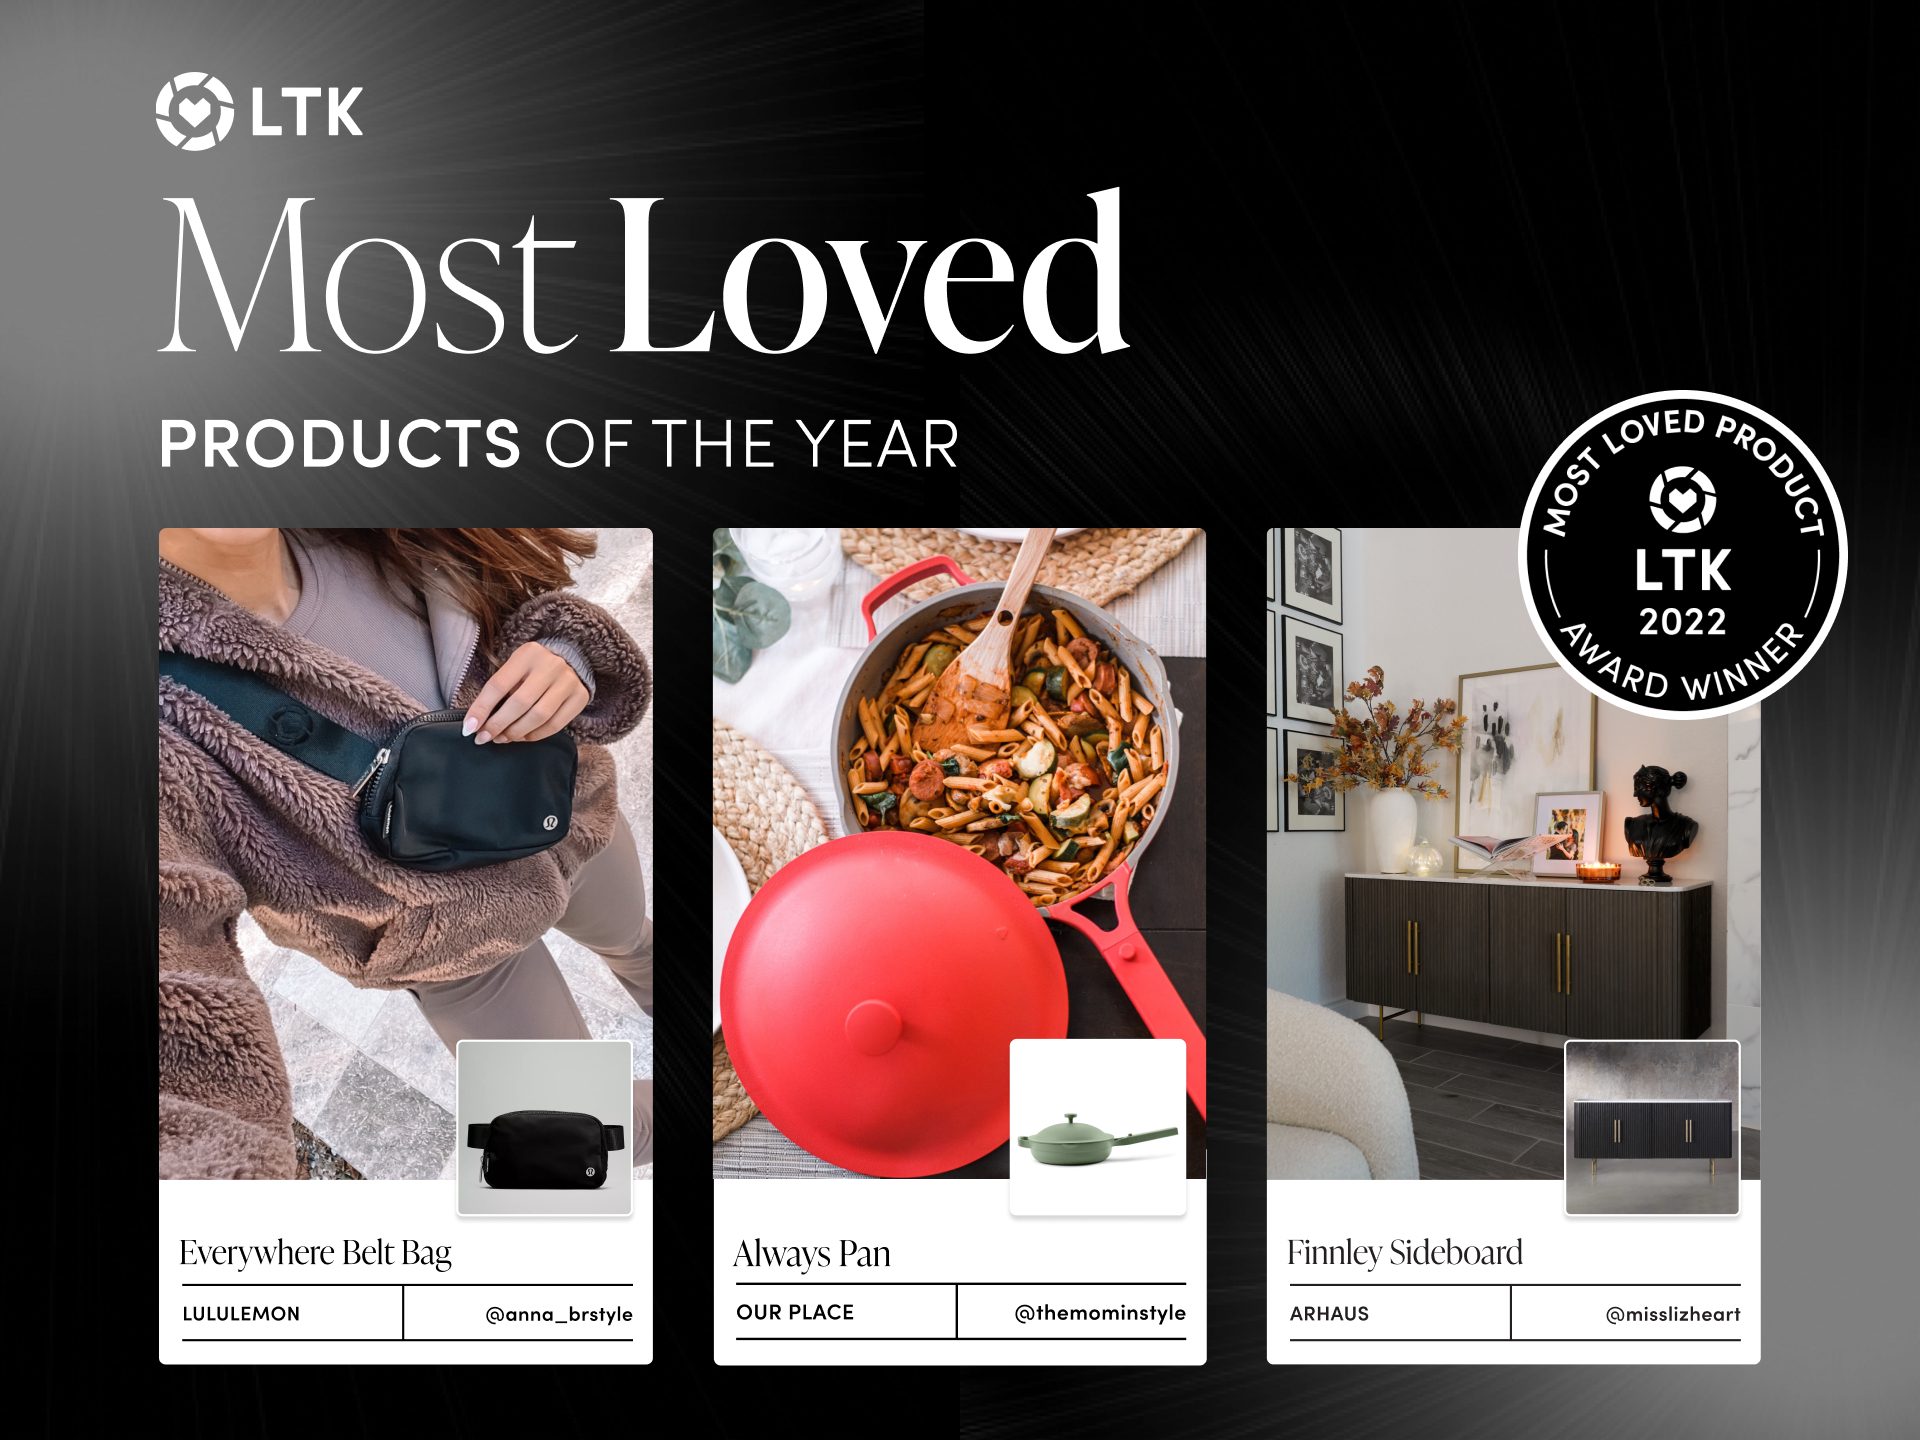 Creator Guided Shopping Platform, LTK, Announces Most Loved Products of the  Year